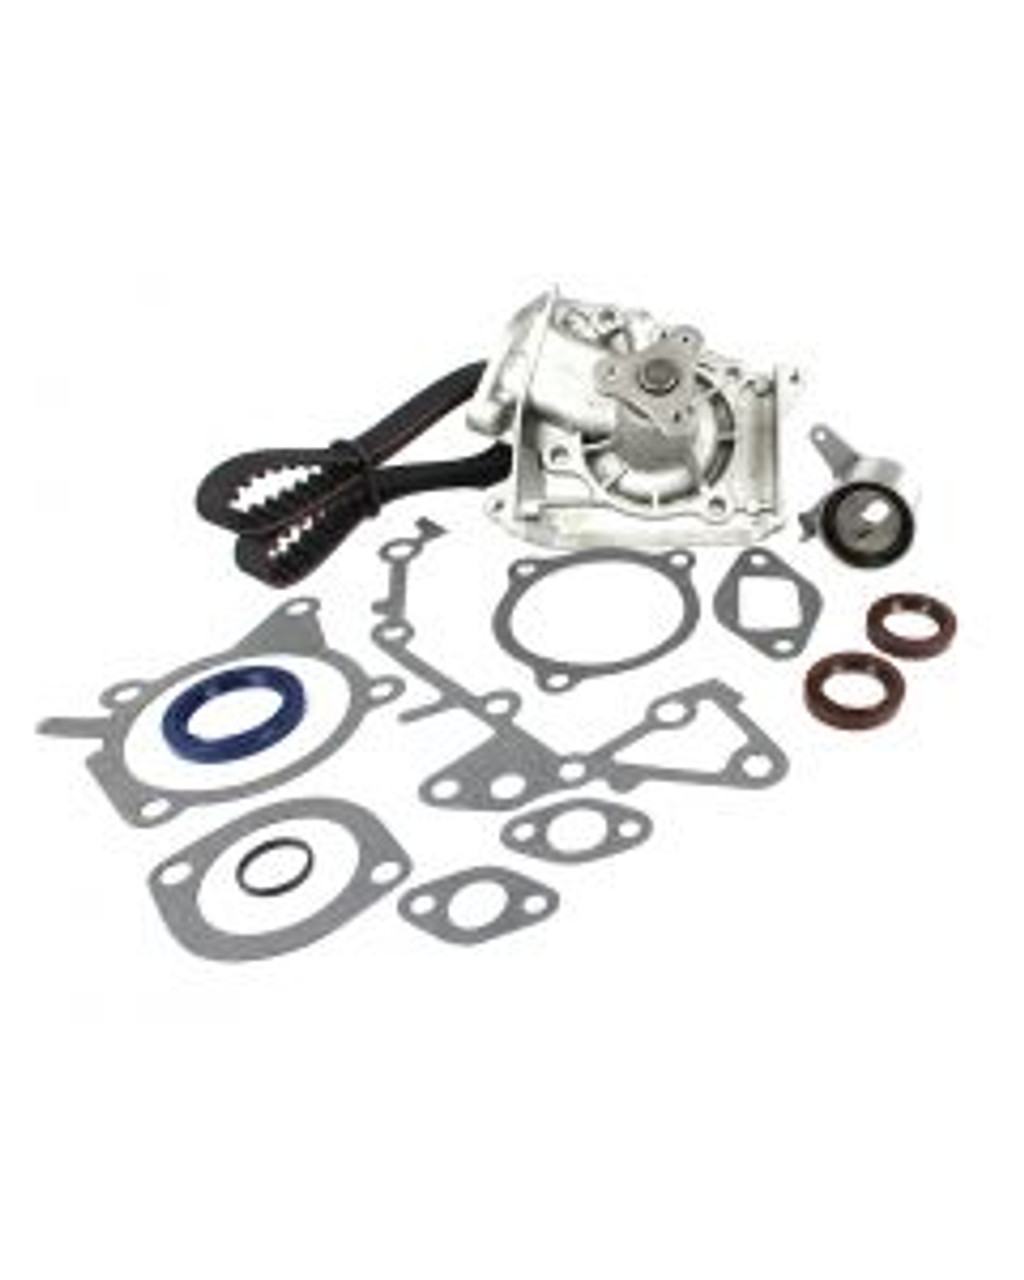 Timing Belt Kit with Water Pump 1.8L 1990 Mazda Protege - TBK451WP.16